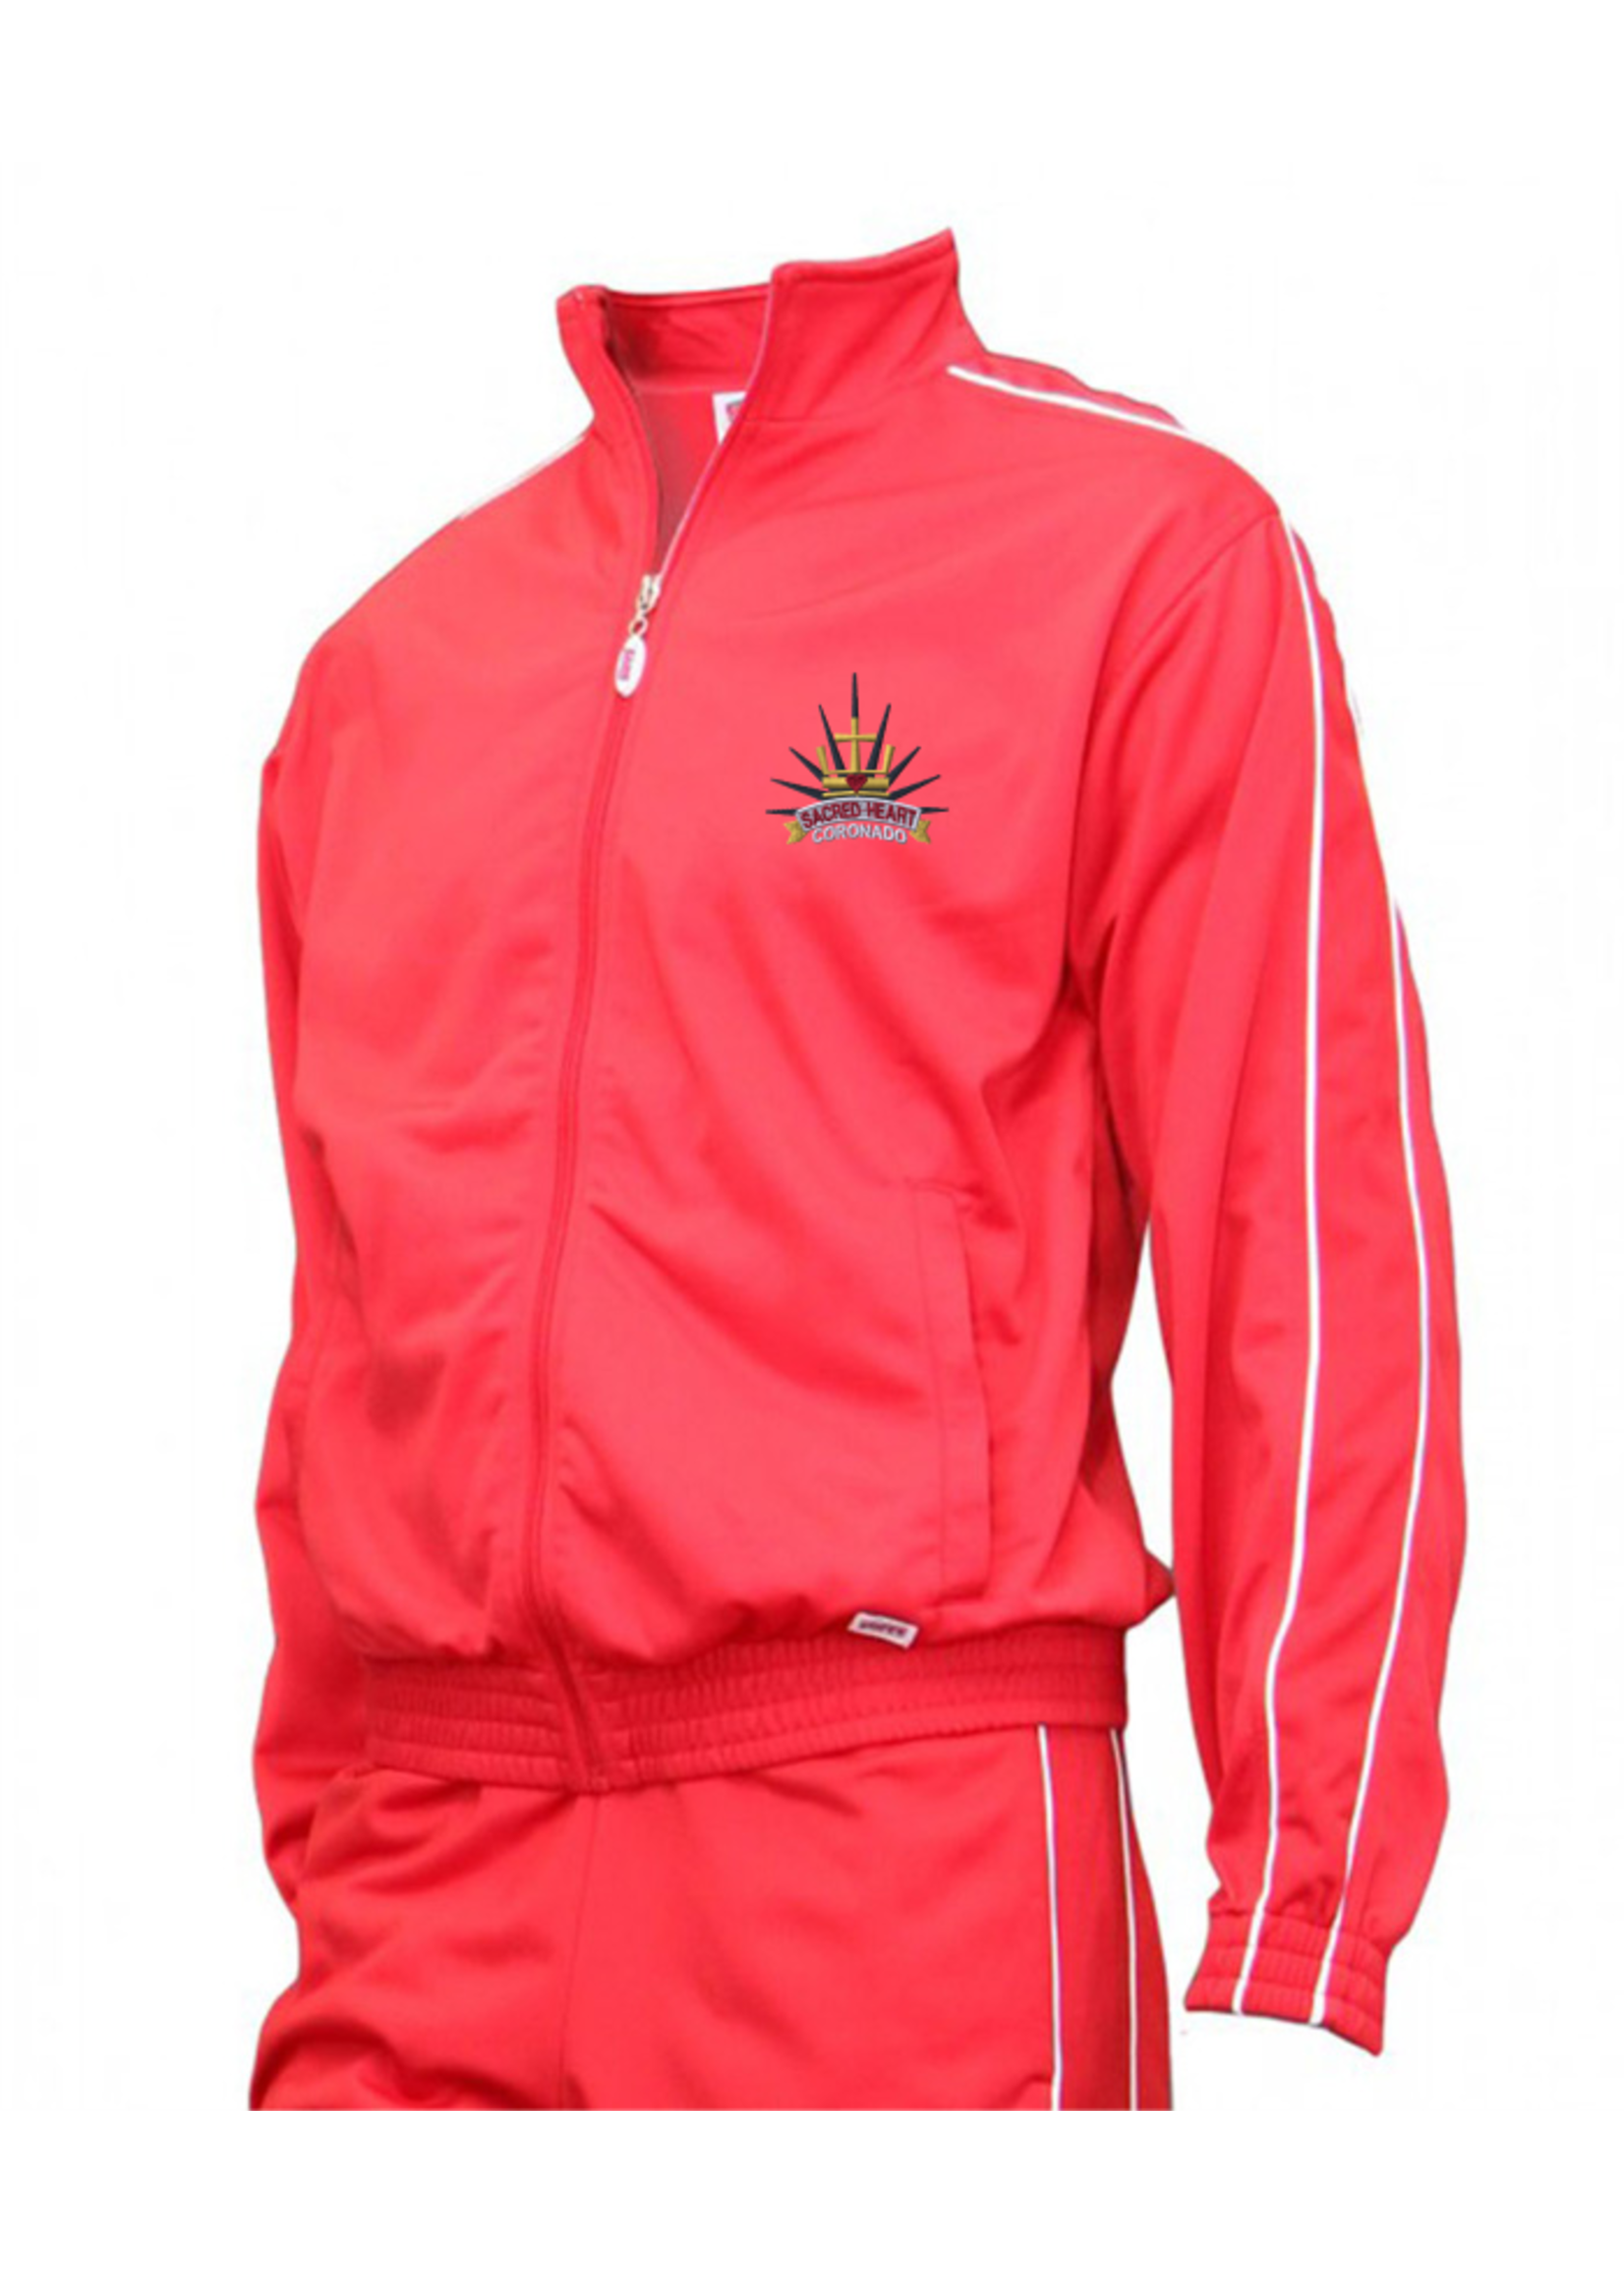 SHPS Red Tricot Warm Up Jacket